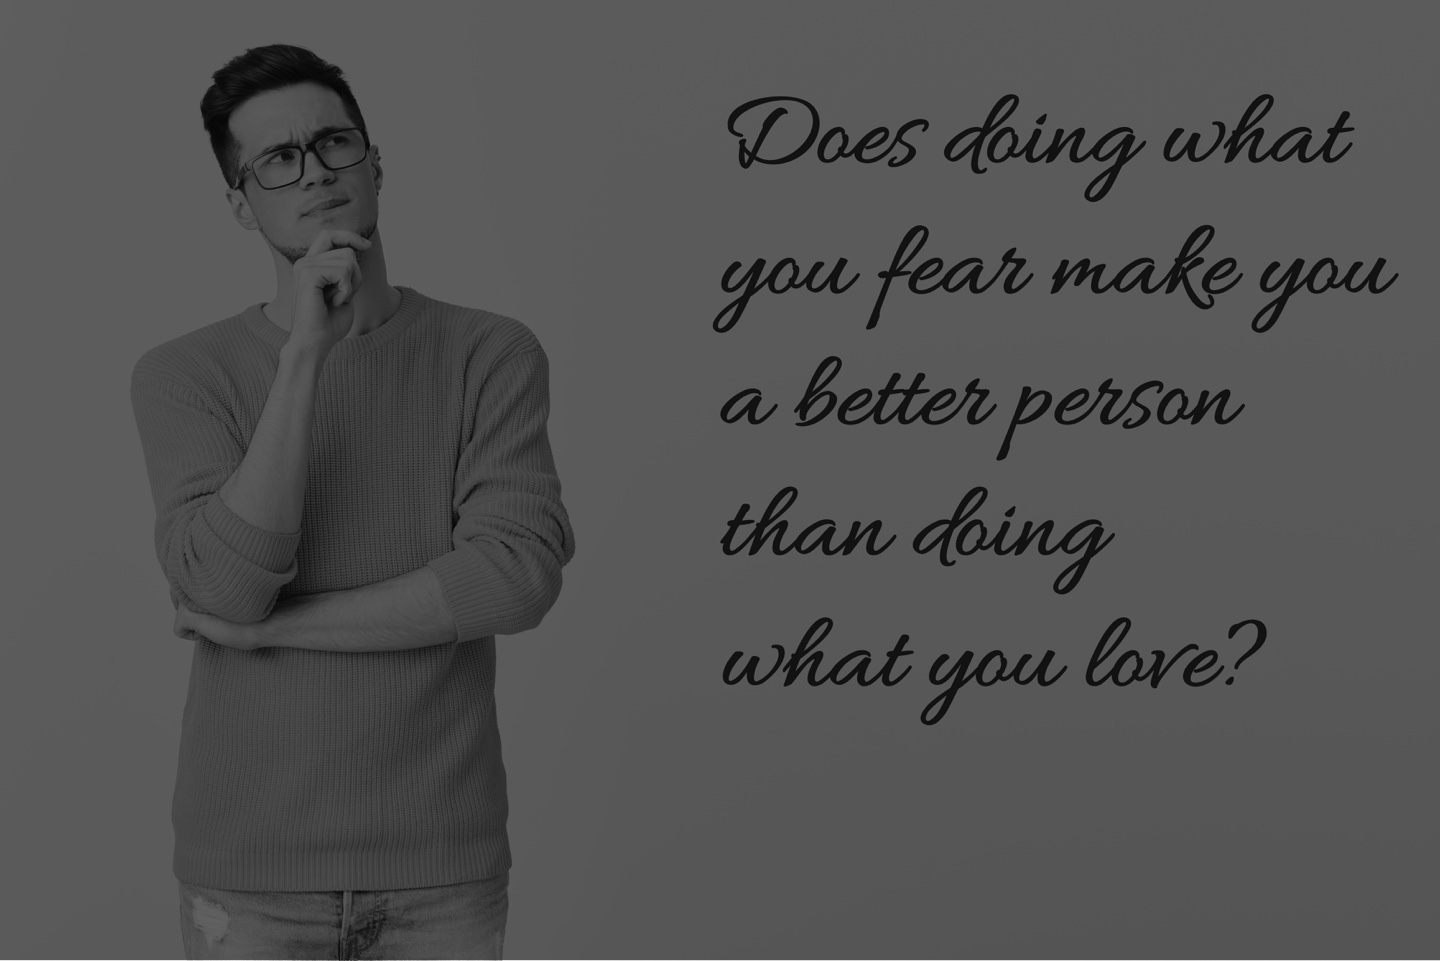 Does doing what you fear make you a better person than doing what you love?